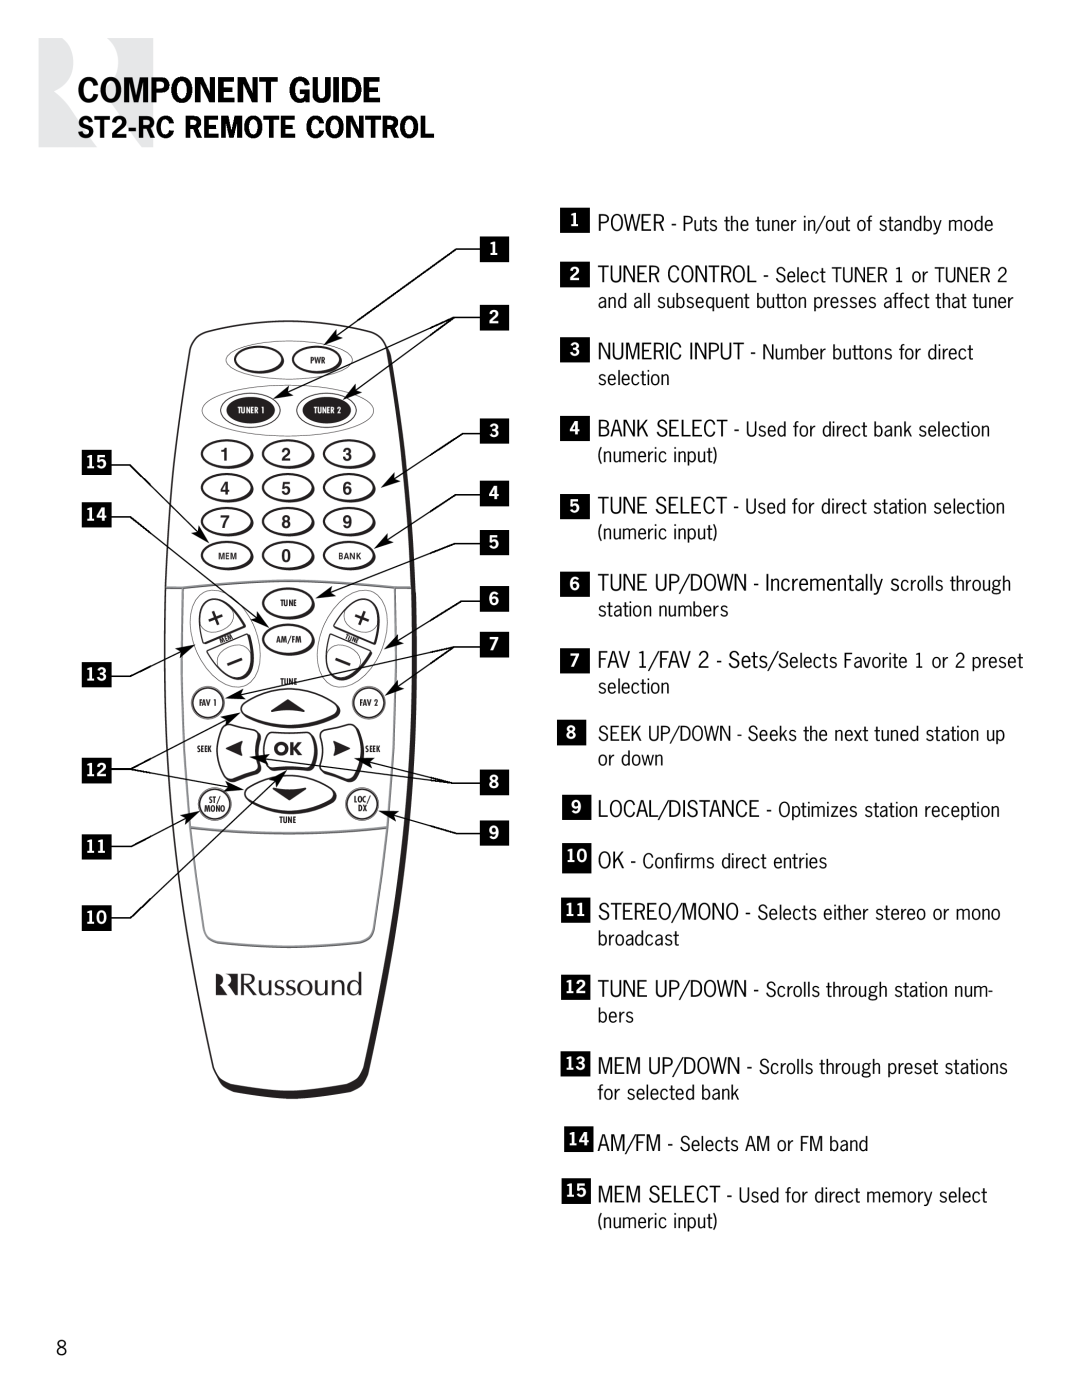 Russound instruction manual ST2-RC REMOTE CONTROL, Component Guide 